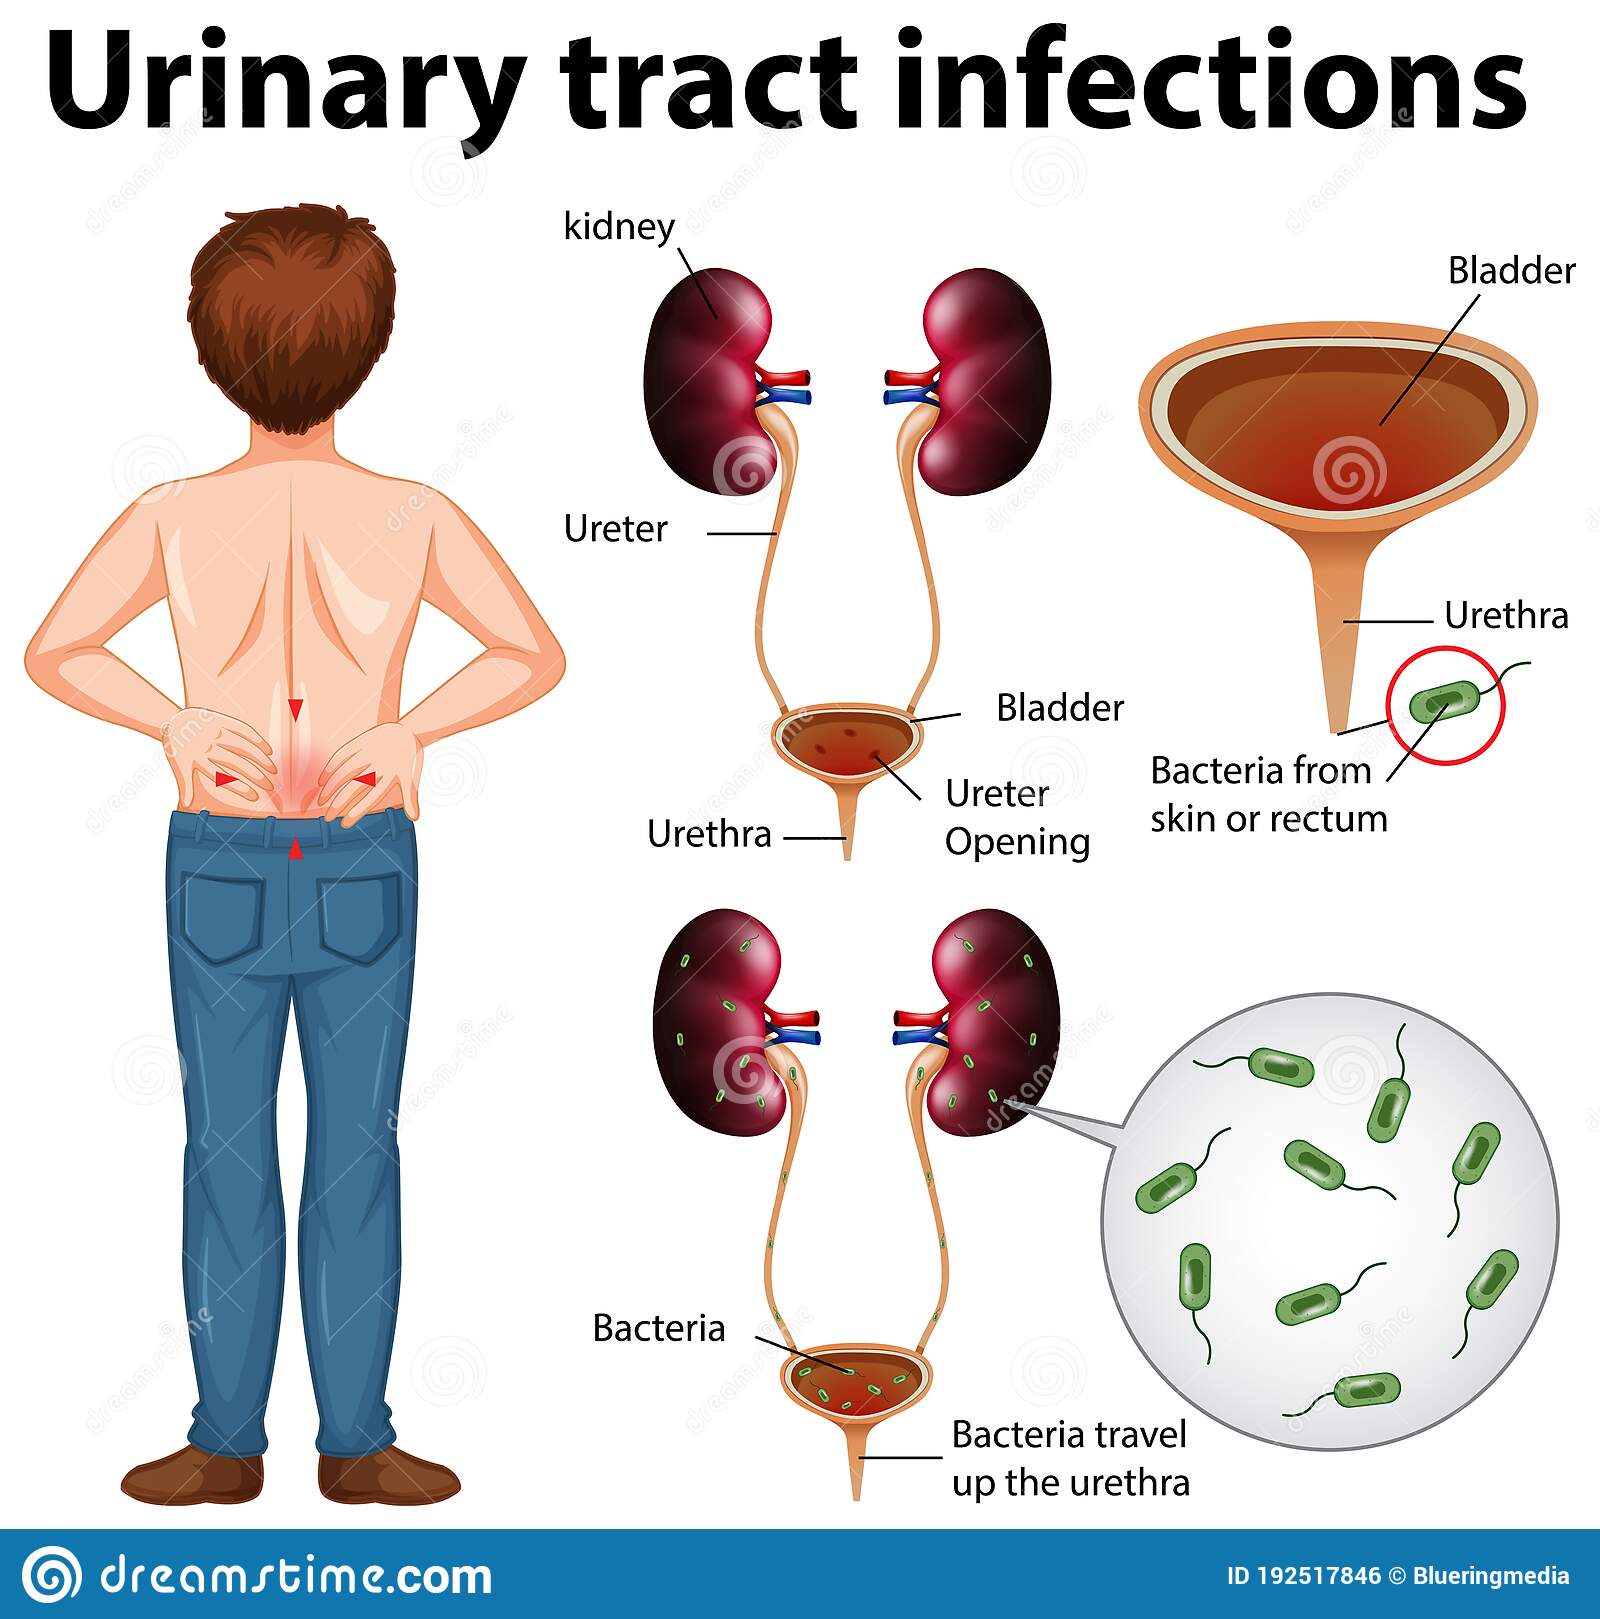 Why Am I Getting Urinary Tract Infections